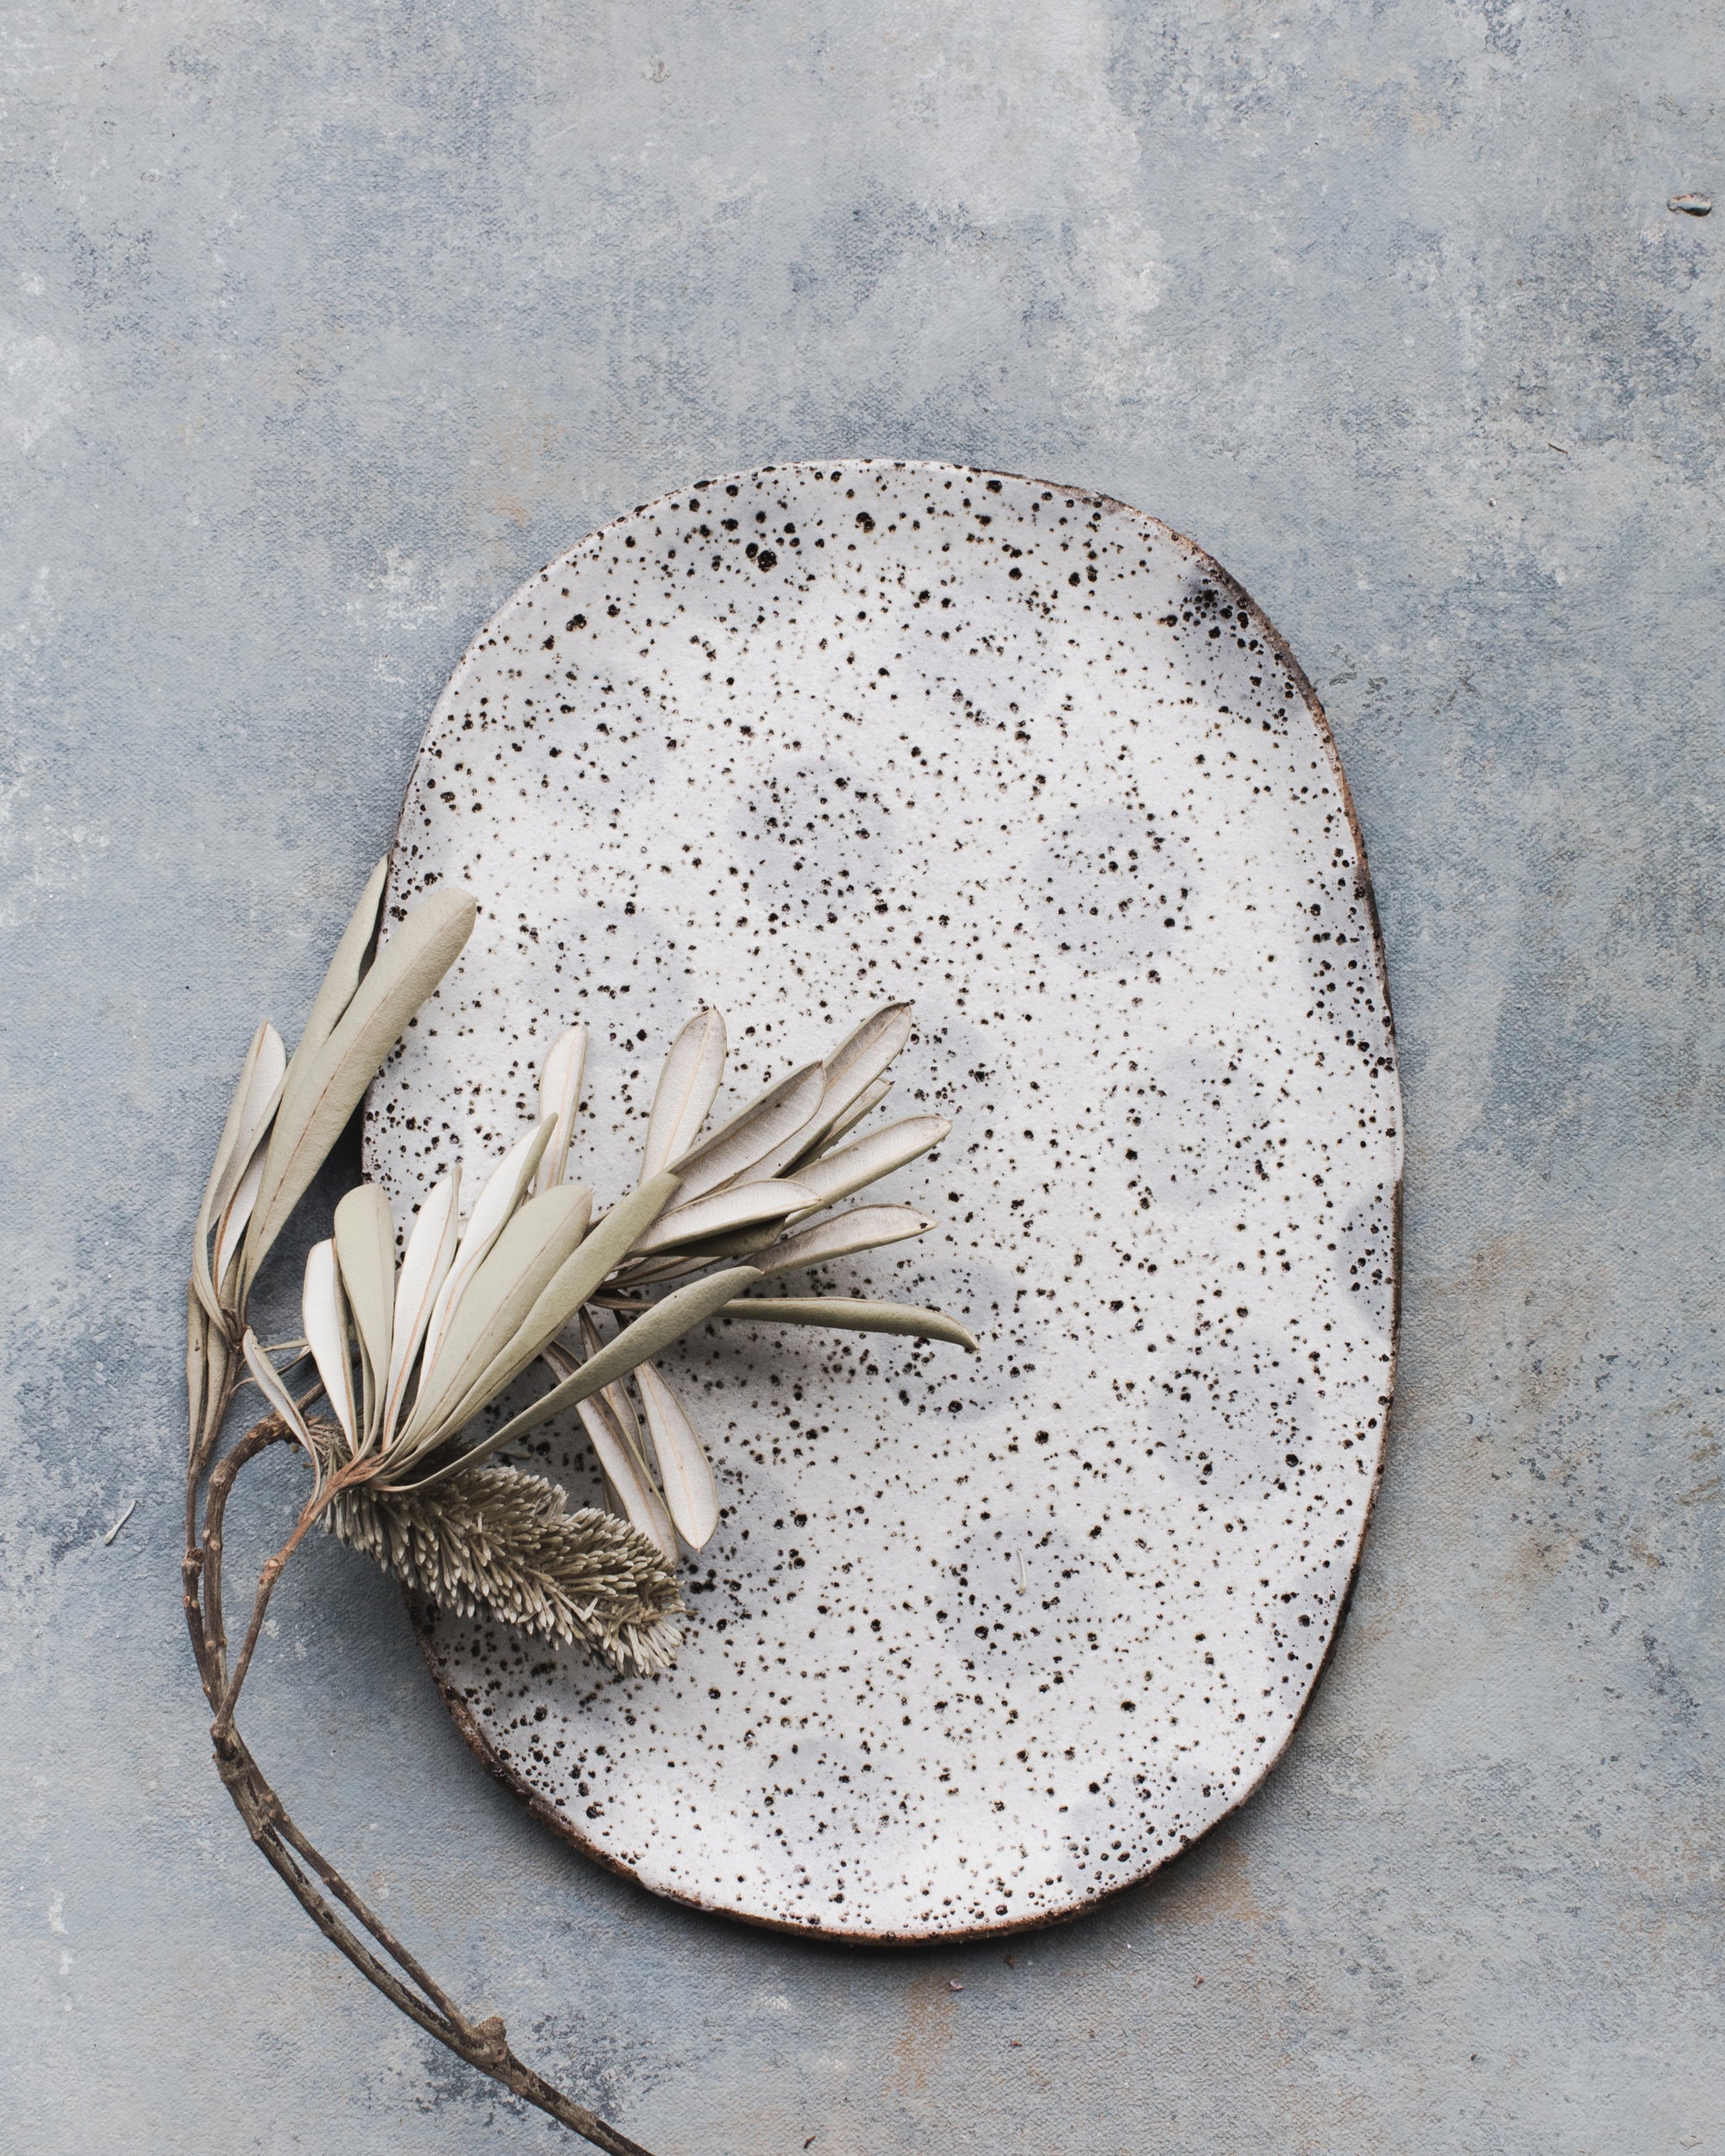 Rustic speckled polka dot oval shaped plate handmade by clay beehive ceramics